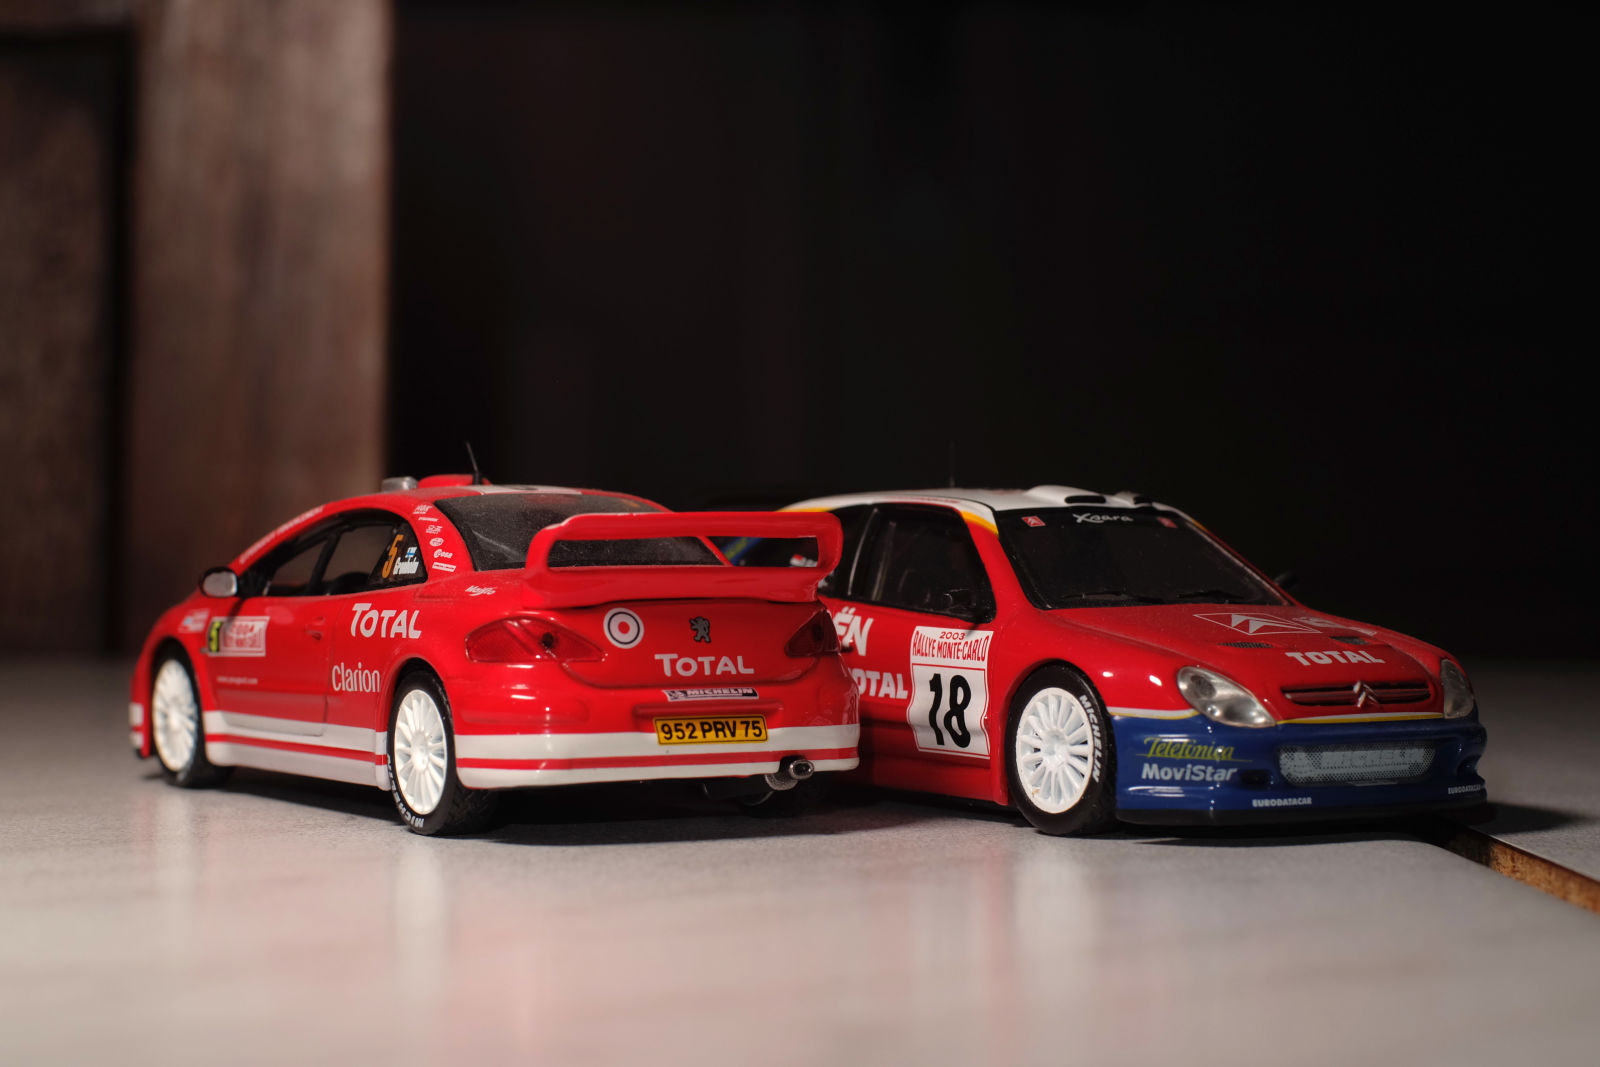 Illustration for article titled Rally die-cast